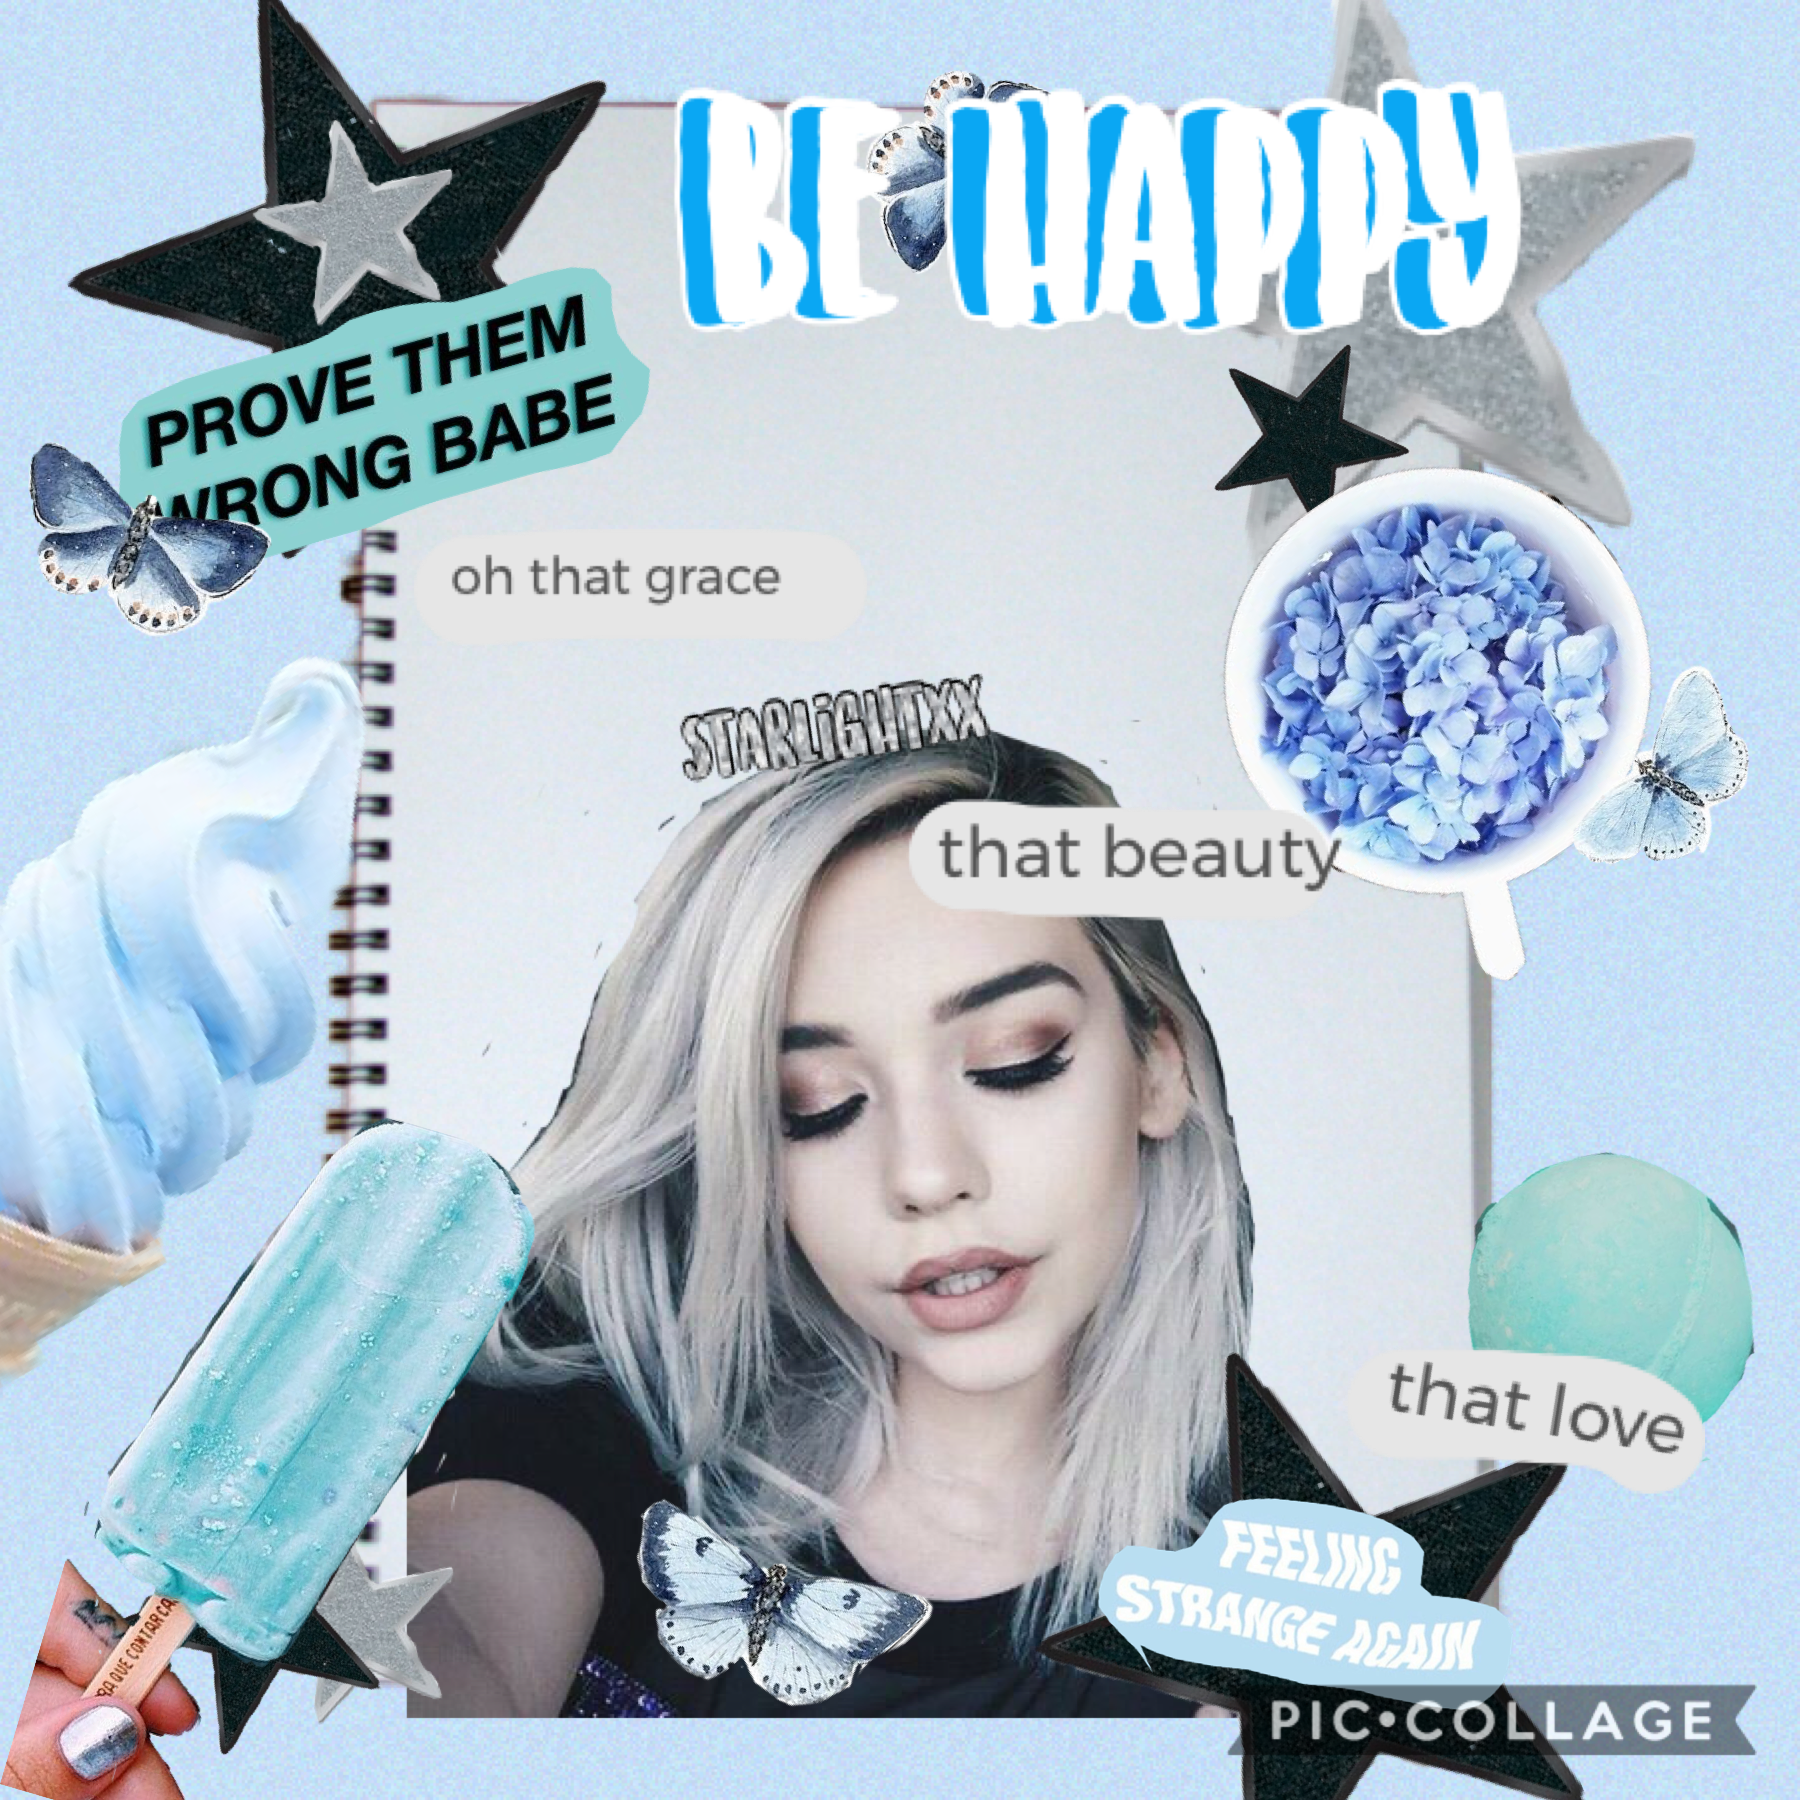 A little aesthetic collage I made. Not really sure what i was going for, but i was expirementing